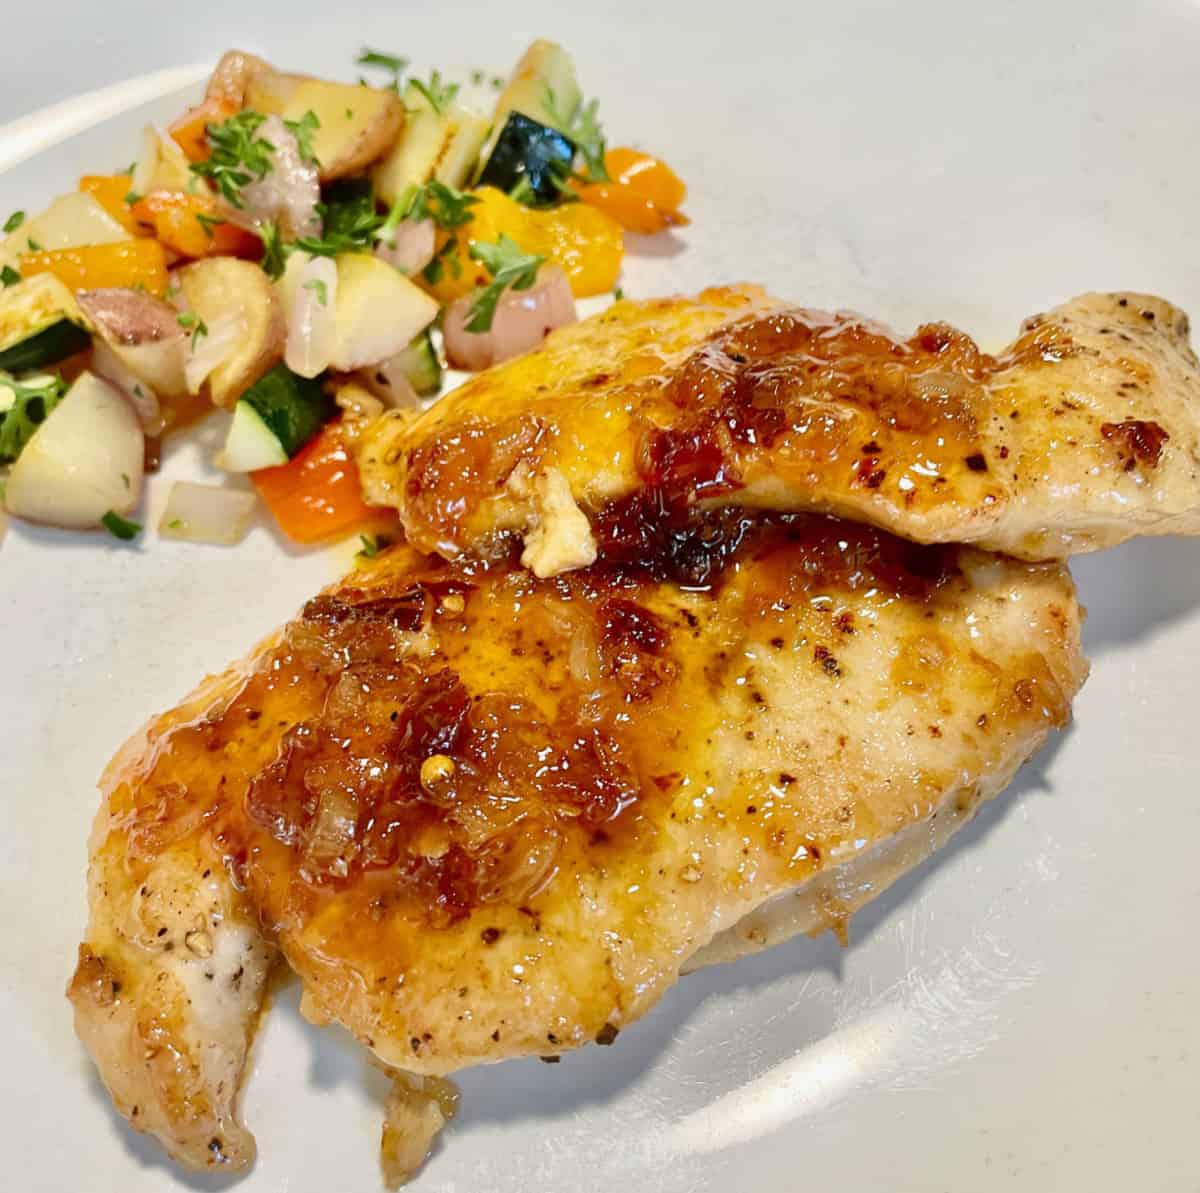 The finished dish for a quick easy sweet spicy apricot chipotle glazed turkey cutlet.